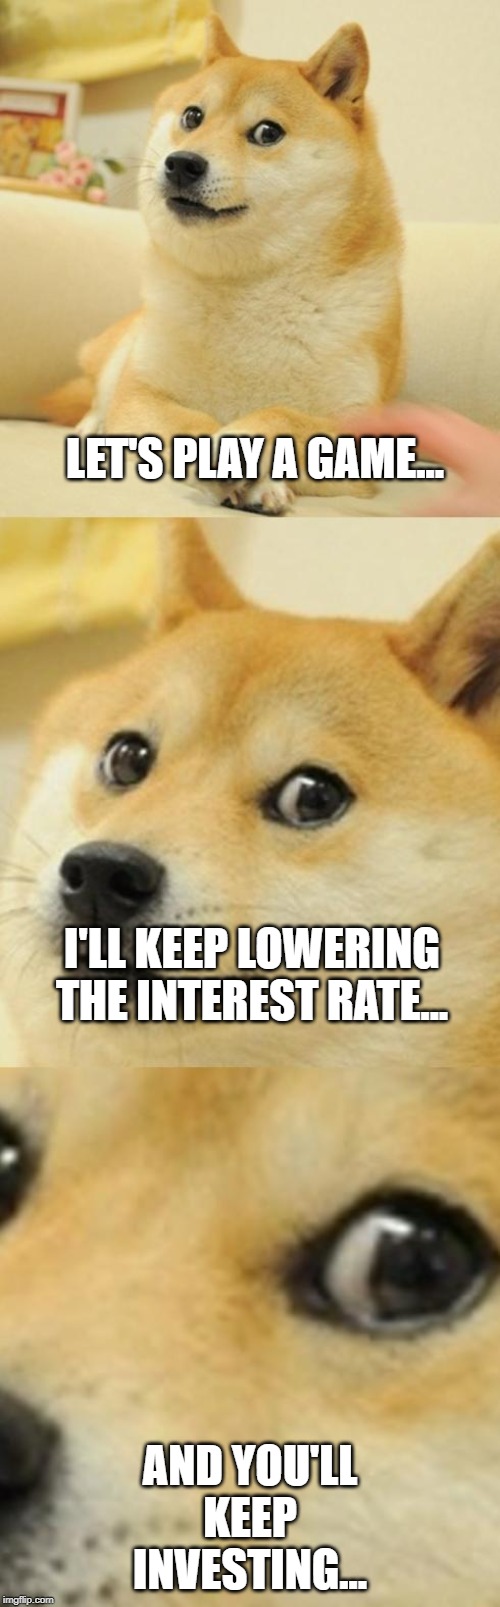 Doge Game | LET'S PLAY A GAME... I'LL KEEP LOWERING THE INTEREST RATE... AND YOU'LL KEEP INVESTING... | image tagged in doge game | made w/ Imgflip meme maker